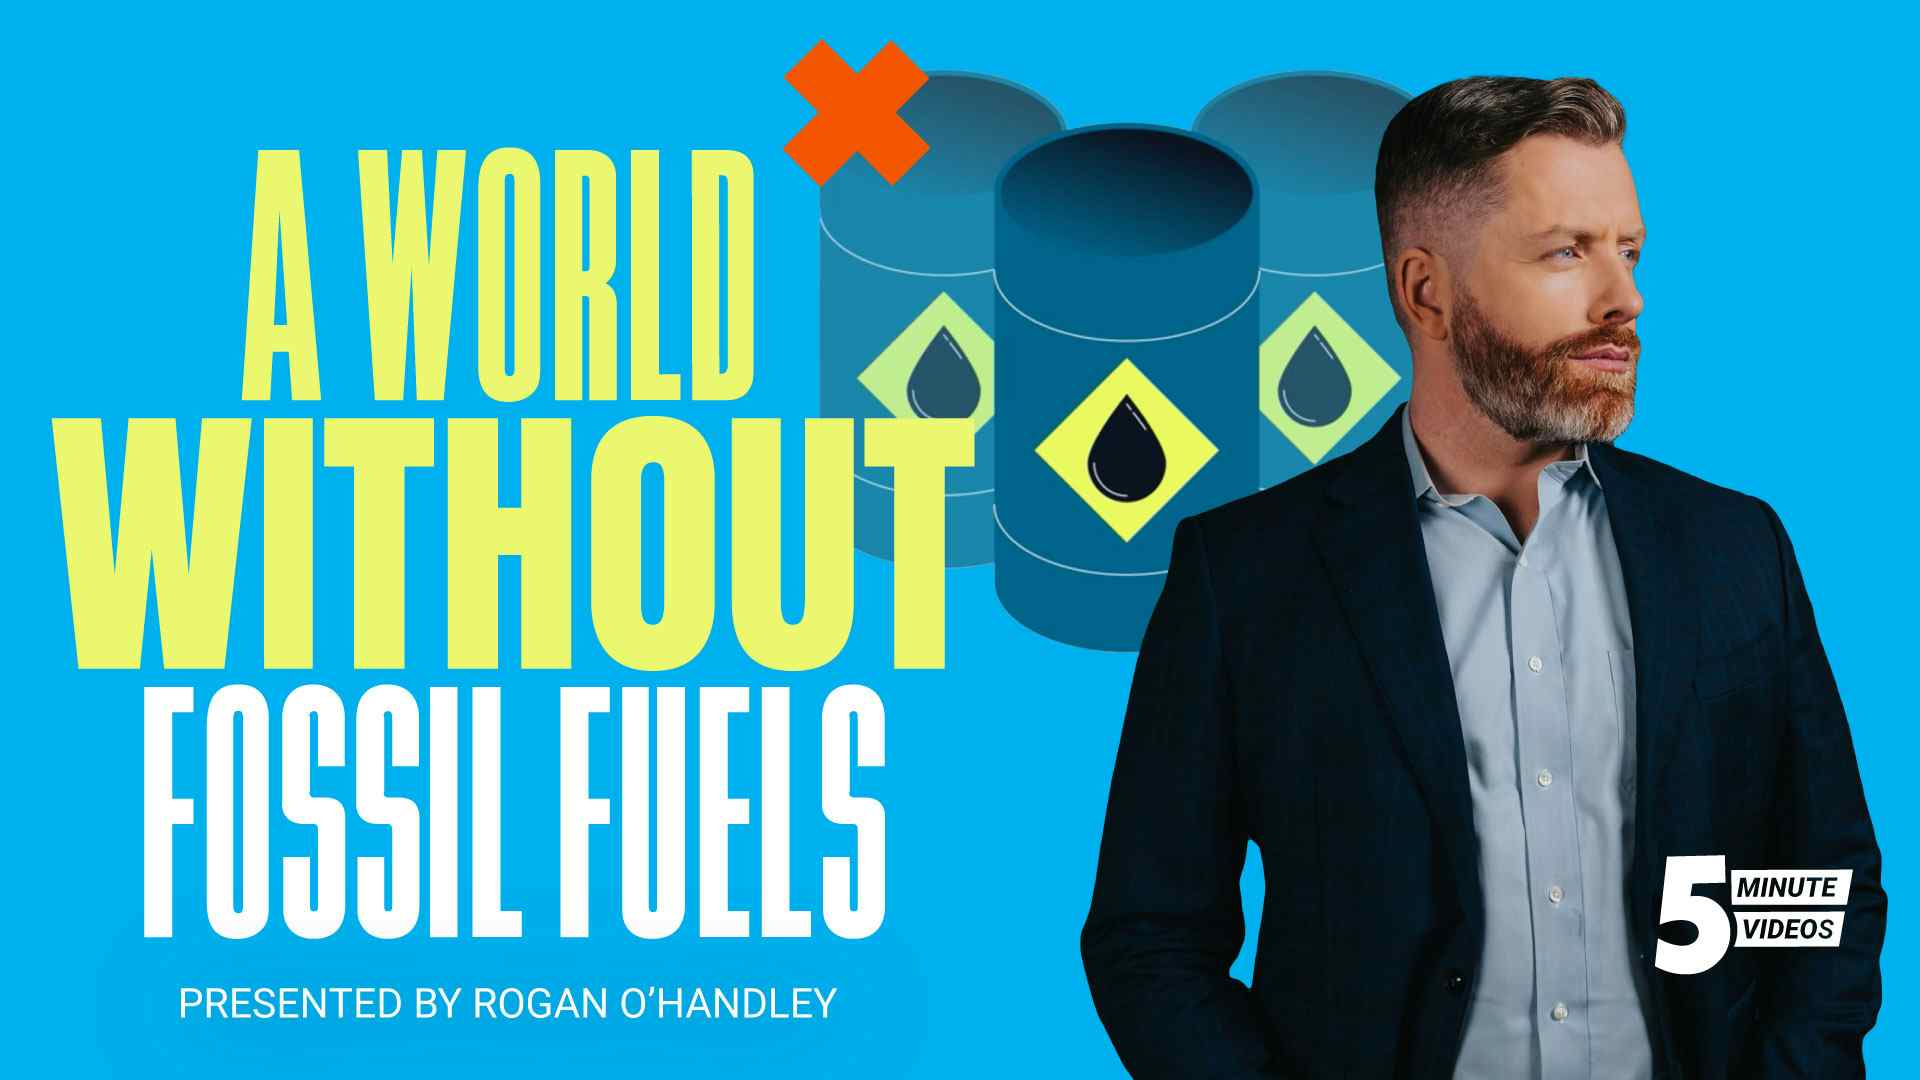 A World without Fossil Fuels